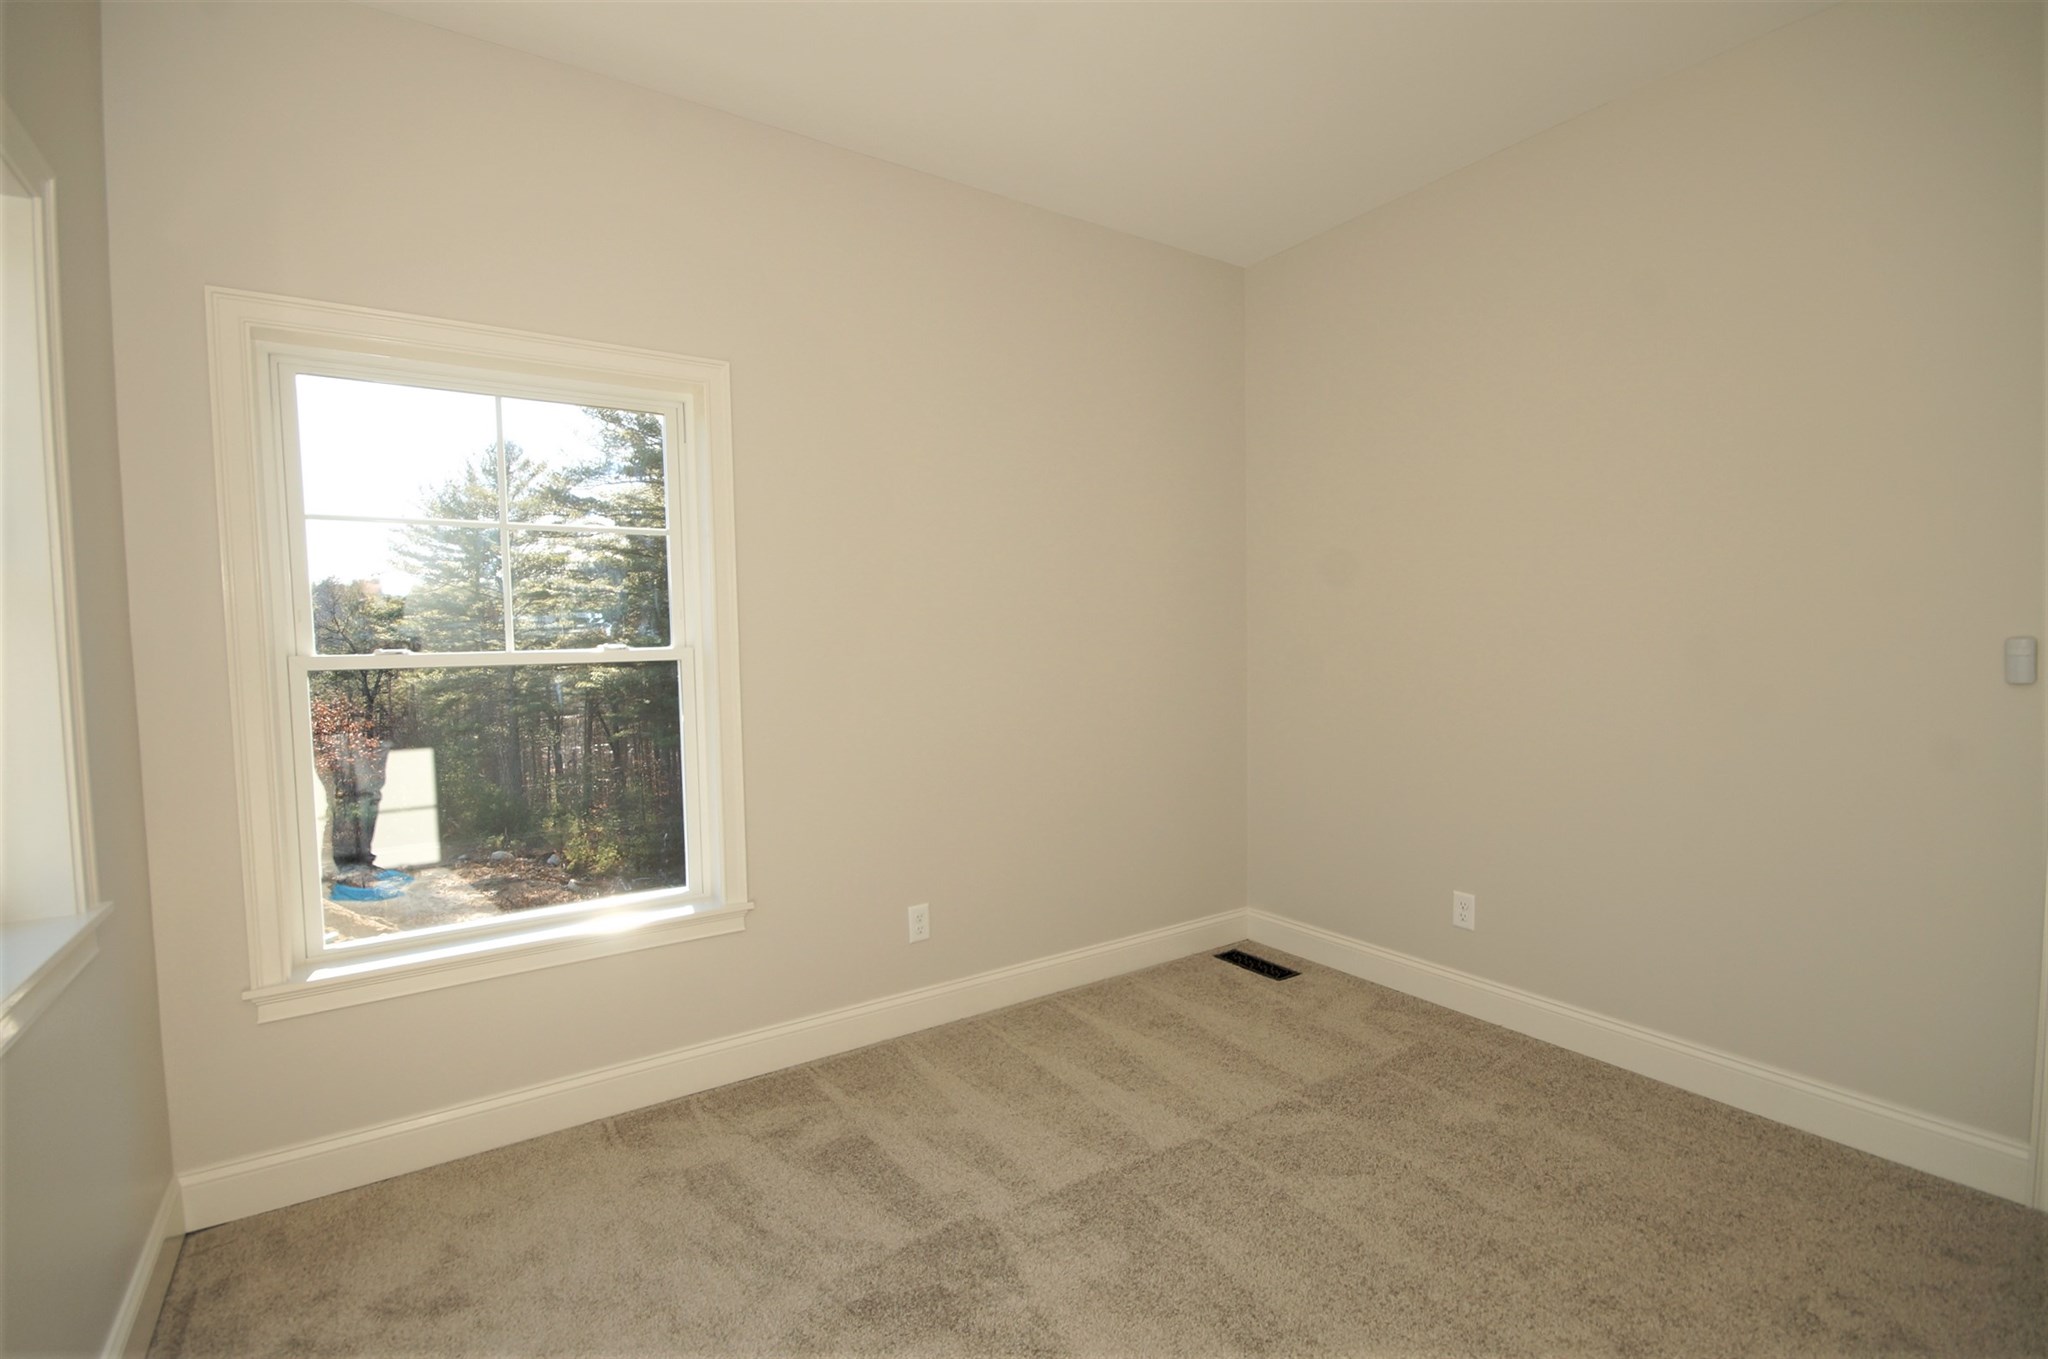 Spacious Mudroom and Laundry off of garage entrance to home. Washer and dryer does not stay